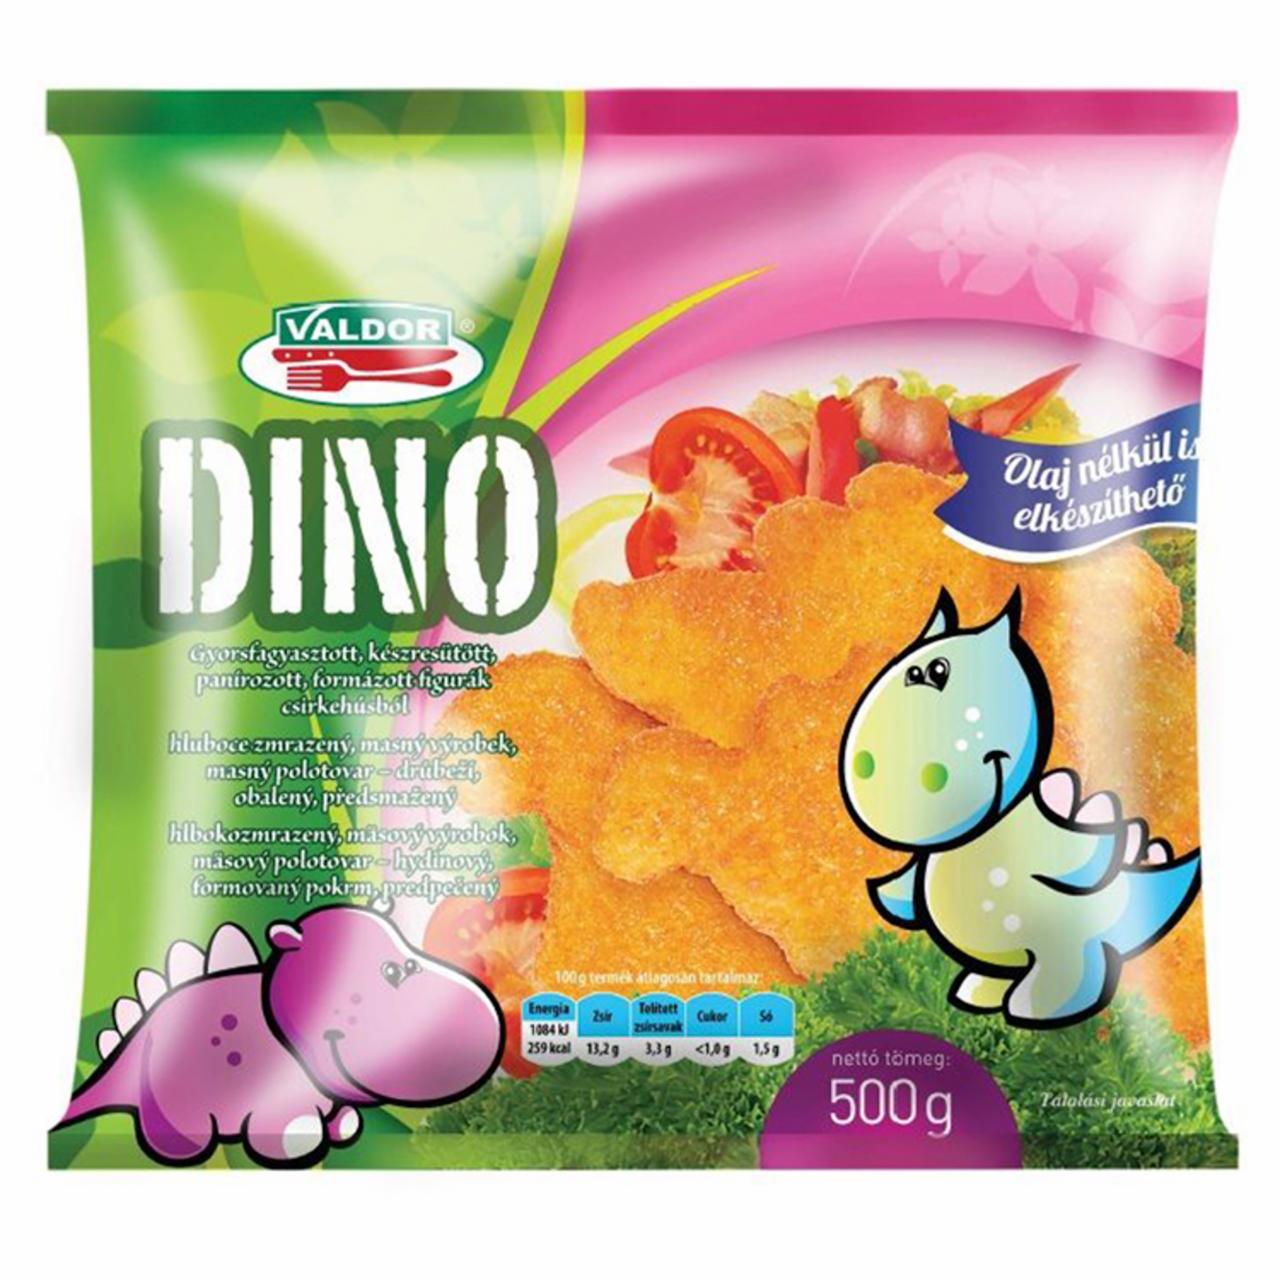 Photo - Valdor Dino Quick-Frozen, Ready-Fried, Breaded, Shaped Chicken Figures 500 g